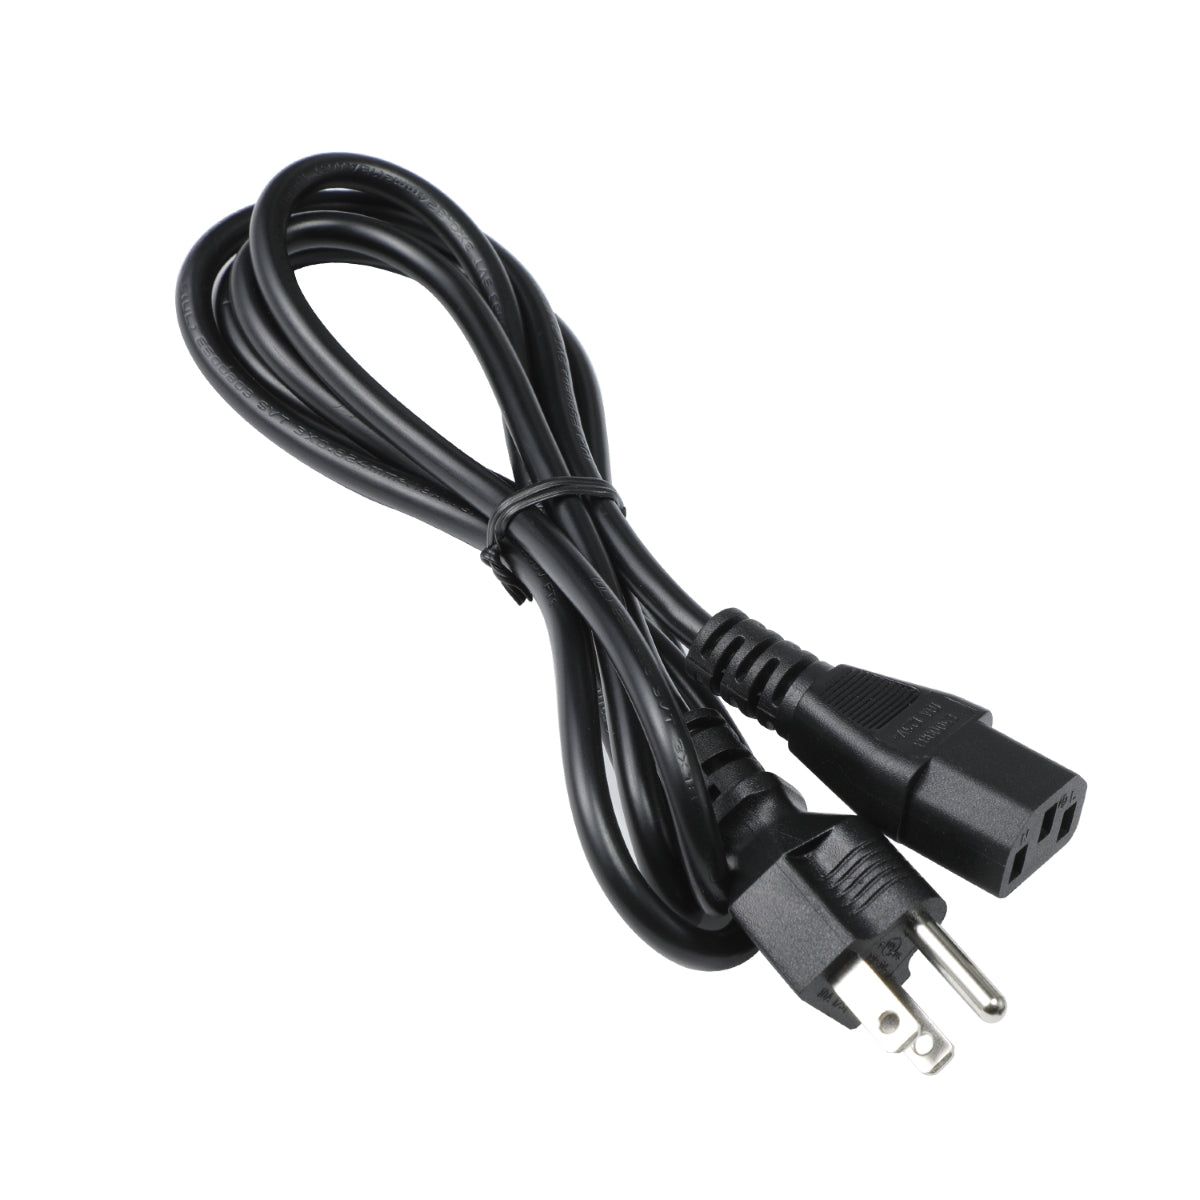 Power Cord for BenQ GL2580H IPS Monitor